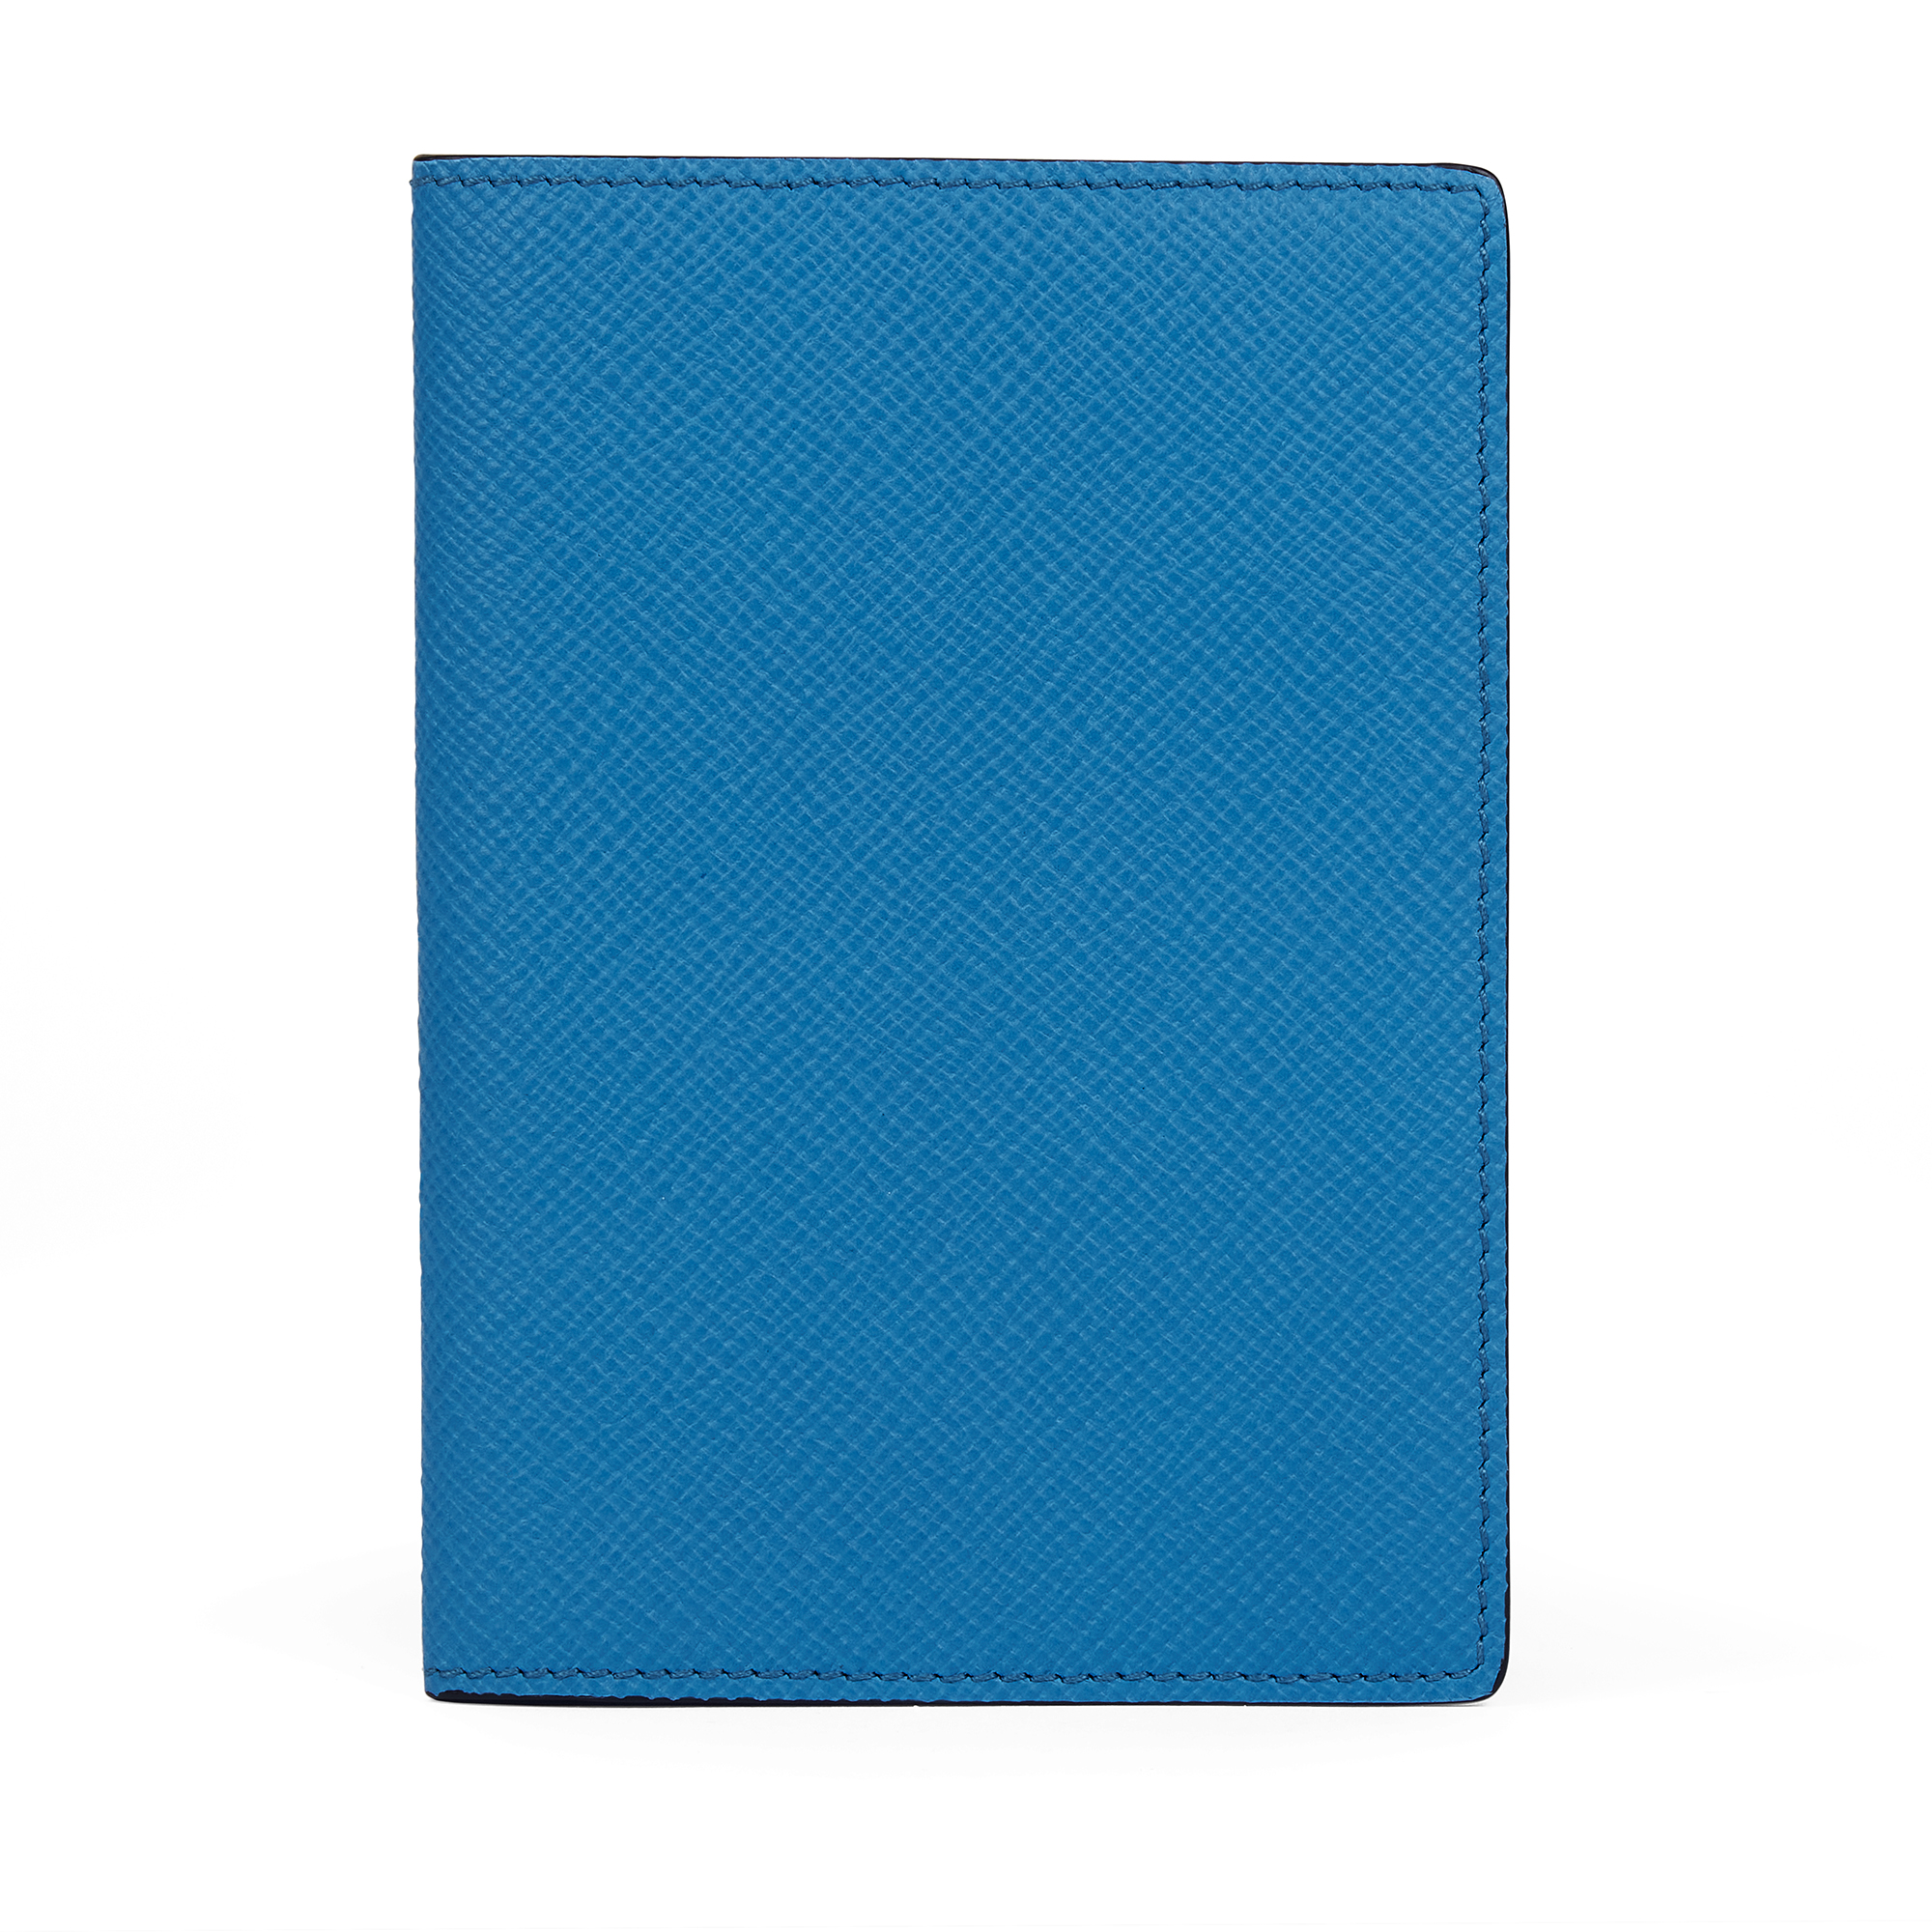 Smythson Passport Cover In Panama In Azure